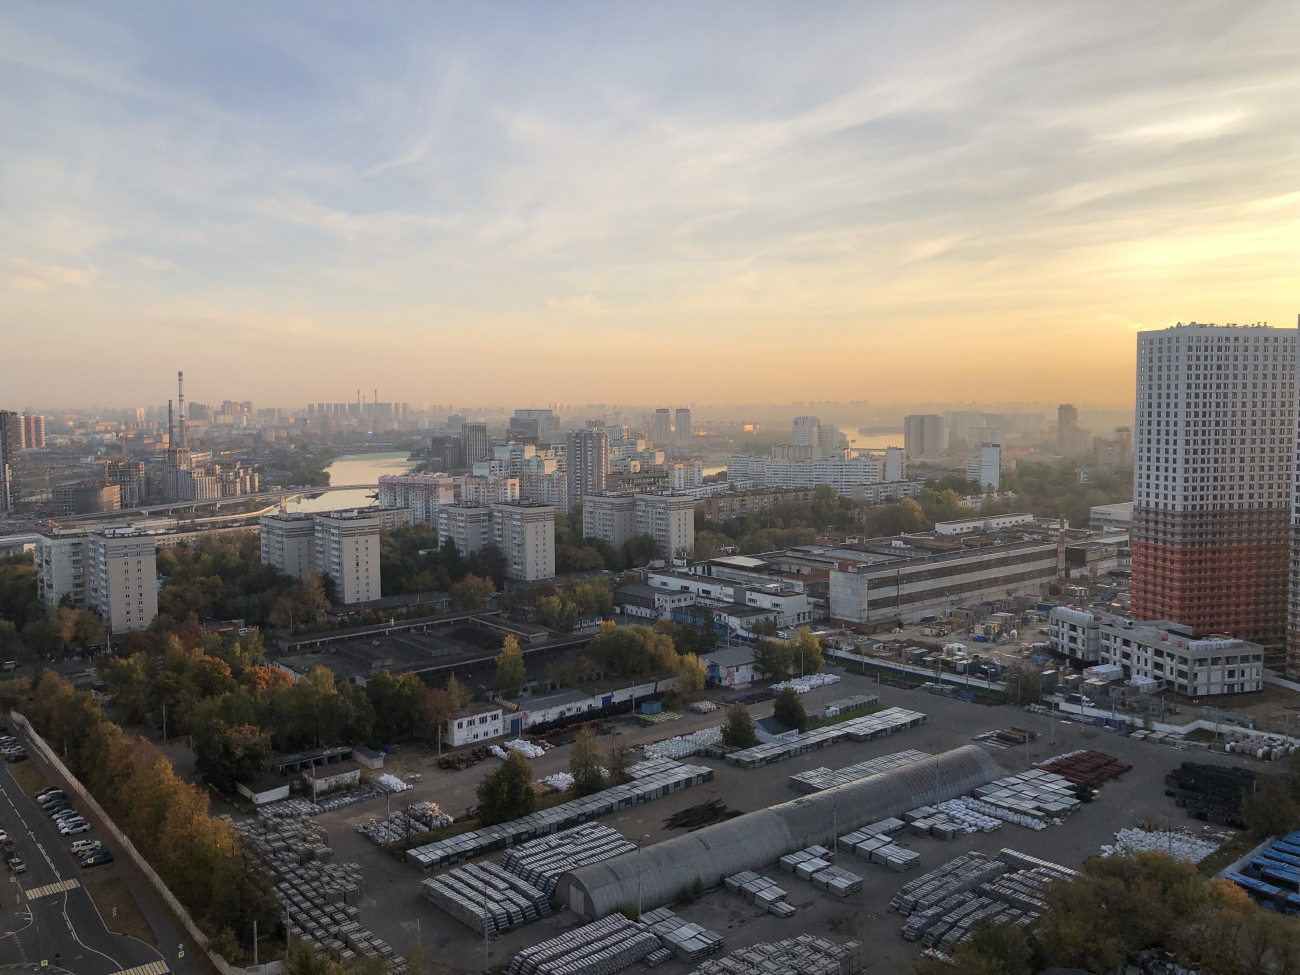 Moscova — Trolleybus depots: [7]; Moscova — Views from a height